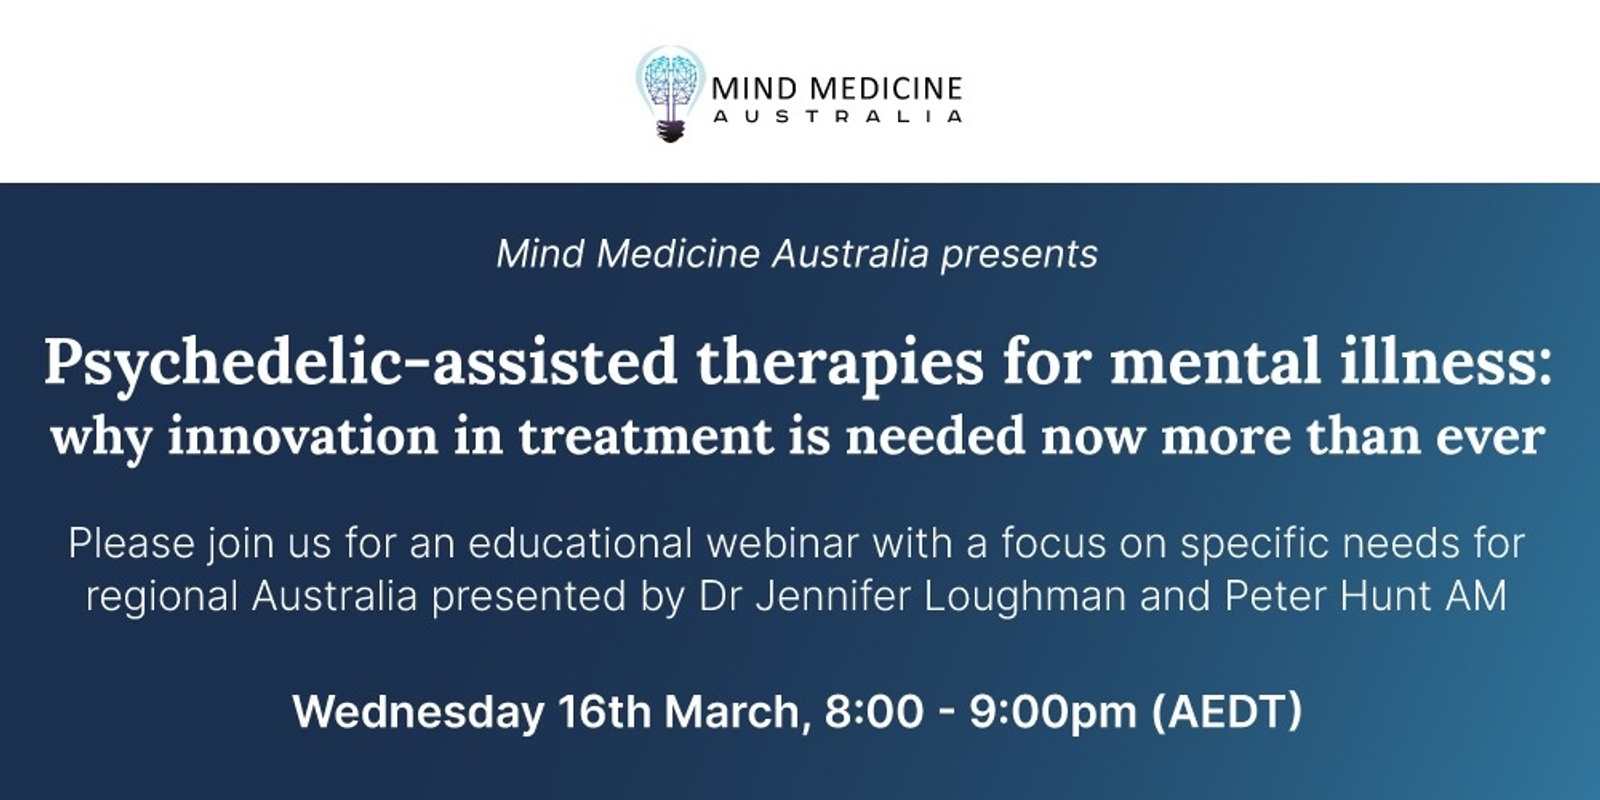 Banner image for MMA FREE Webinar Series - Psychedelic-assisted therapies for mental illness: why innovation is needed now, more than ever - 16th March 2022